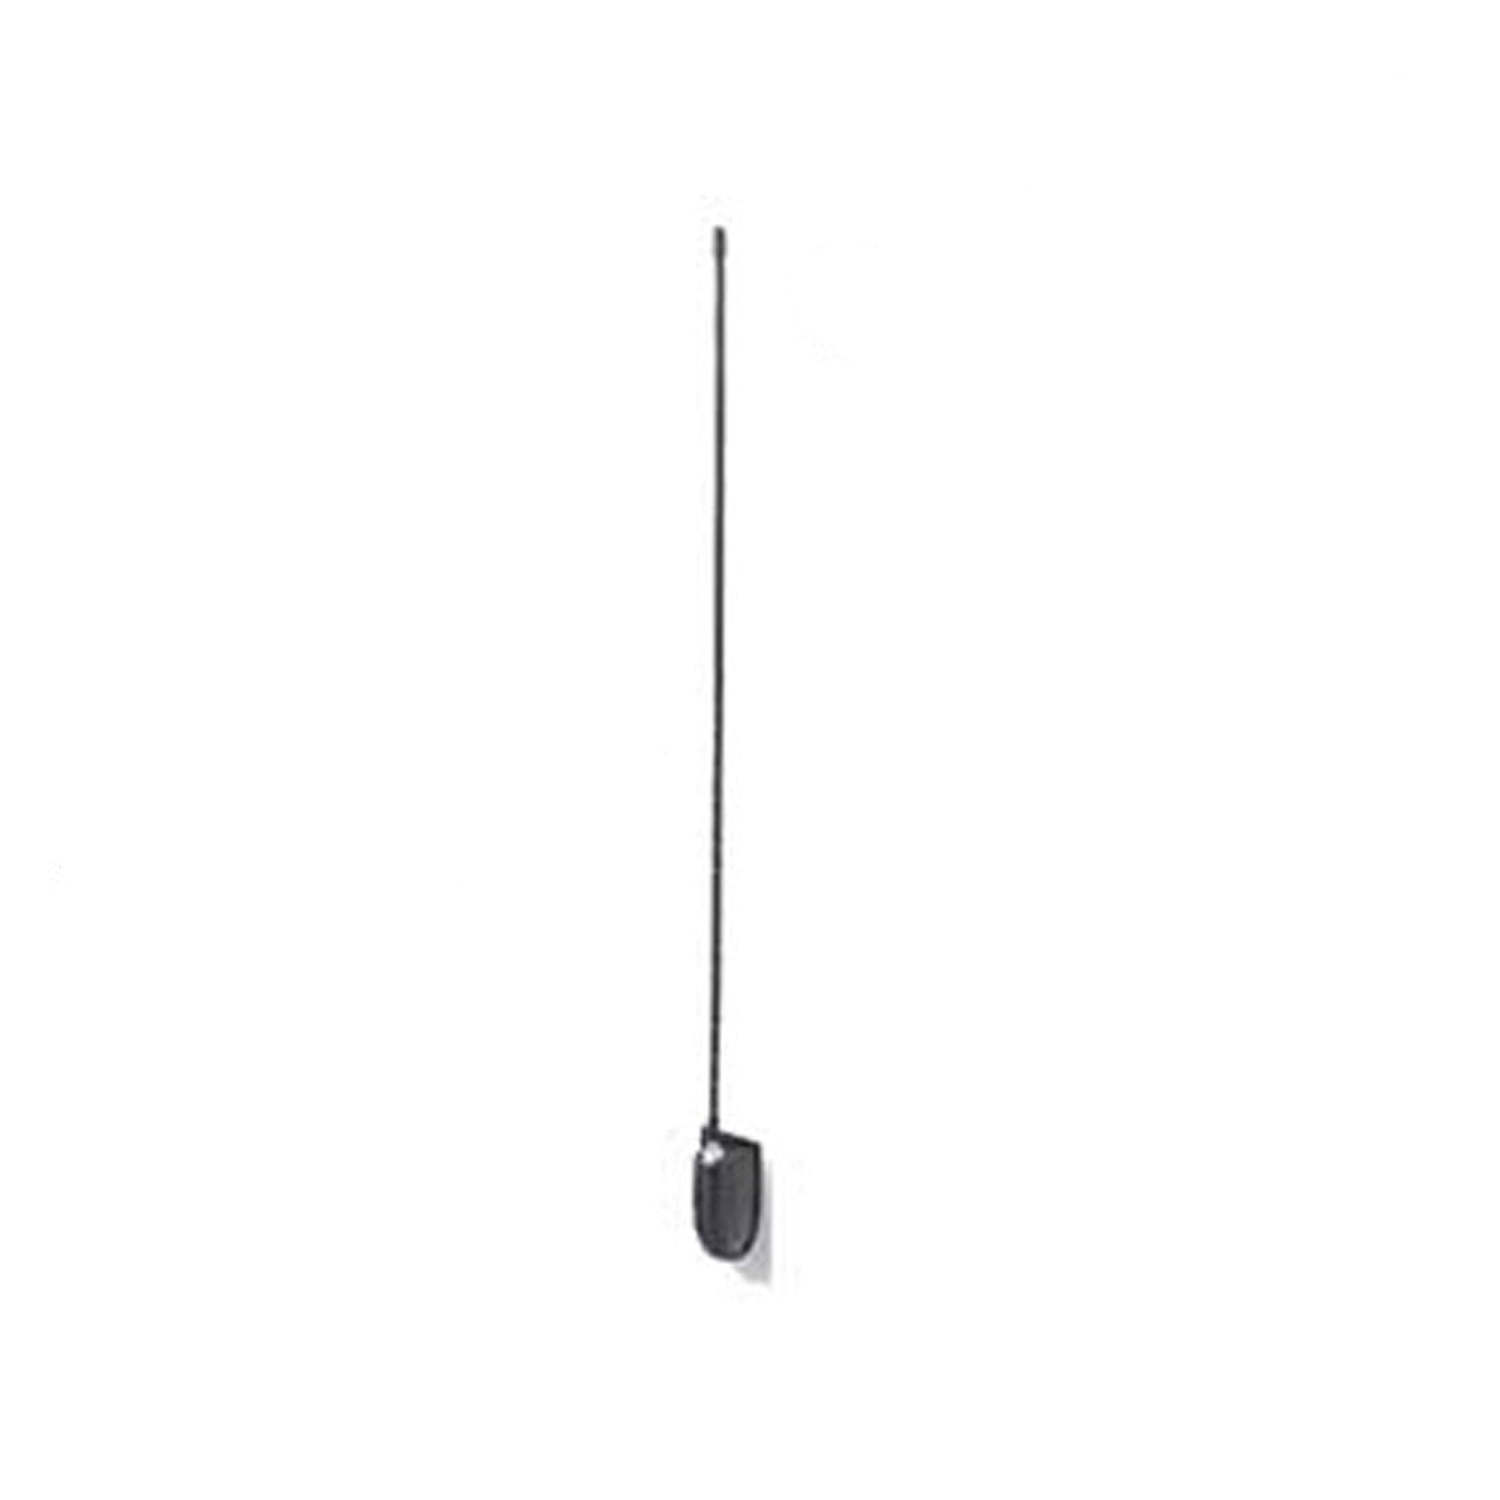 Metra 44-RMMC2 Antenna for 20012-Up Indian and Victory Touring Motorcycles 